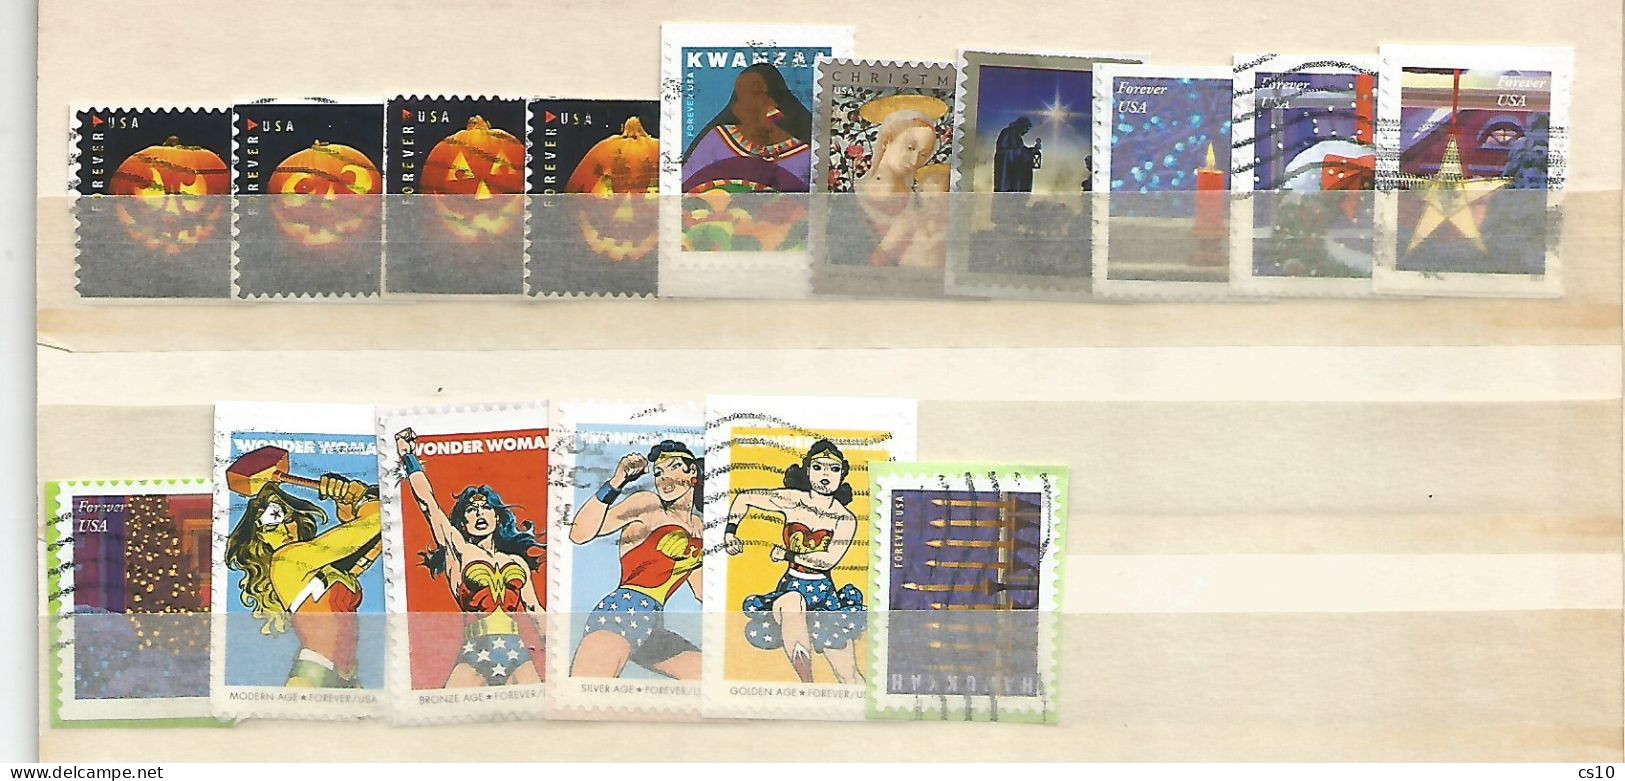 Kiloware Forever USA 2020 BACK TO 2011 Selection stamps of the years ON-PIECE in 925 DIFFERENT pcs used ON-PIECE